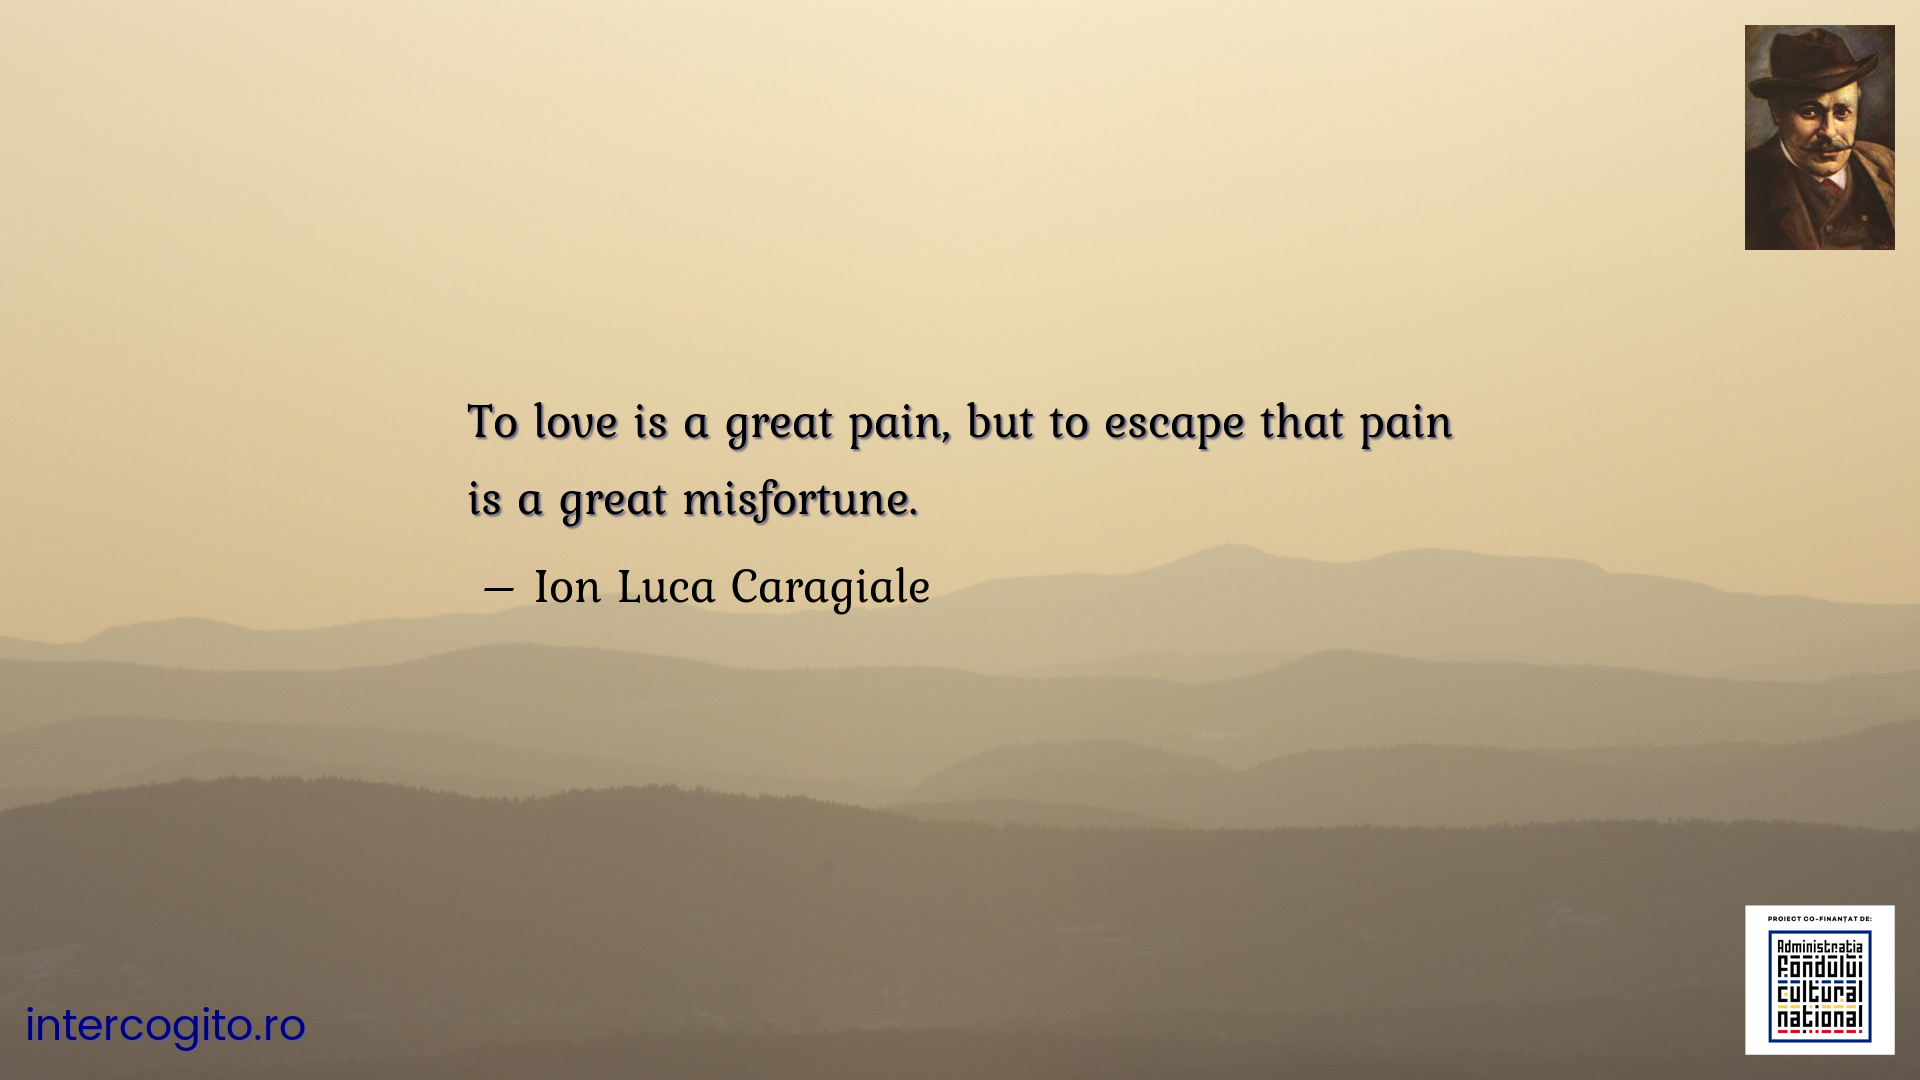 To love is a great pain, but to escape that pain is a great misfortune.